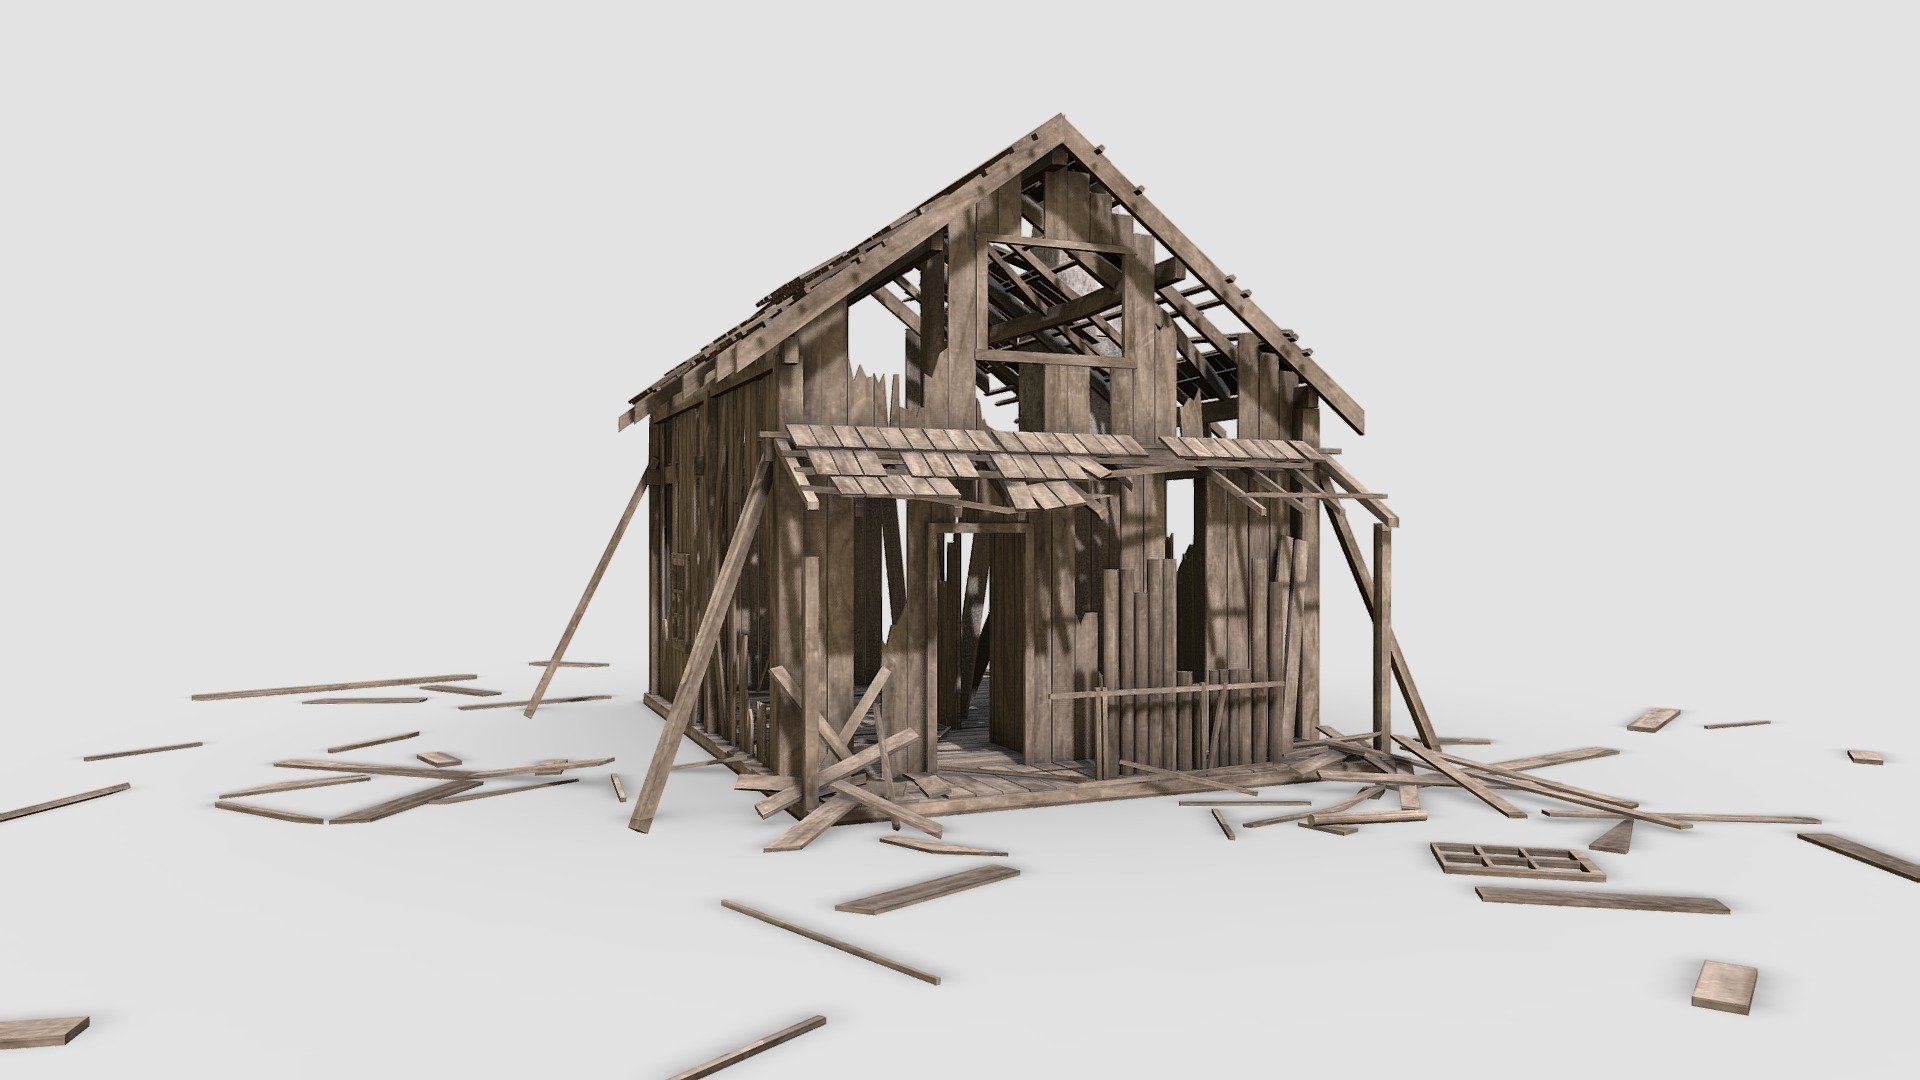 Old House
A Simple Old Wooden House.

If you like this 3d model, please like, comment and follow me 3d model